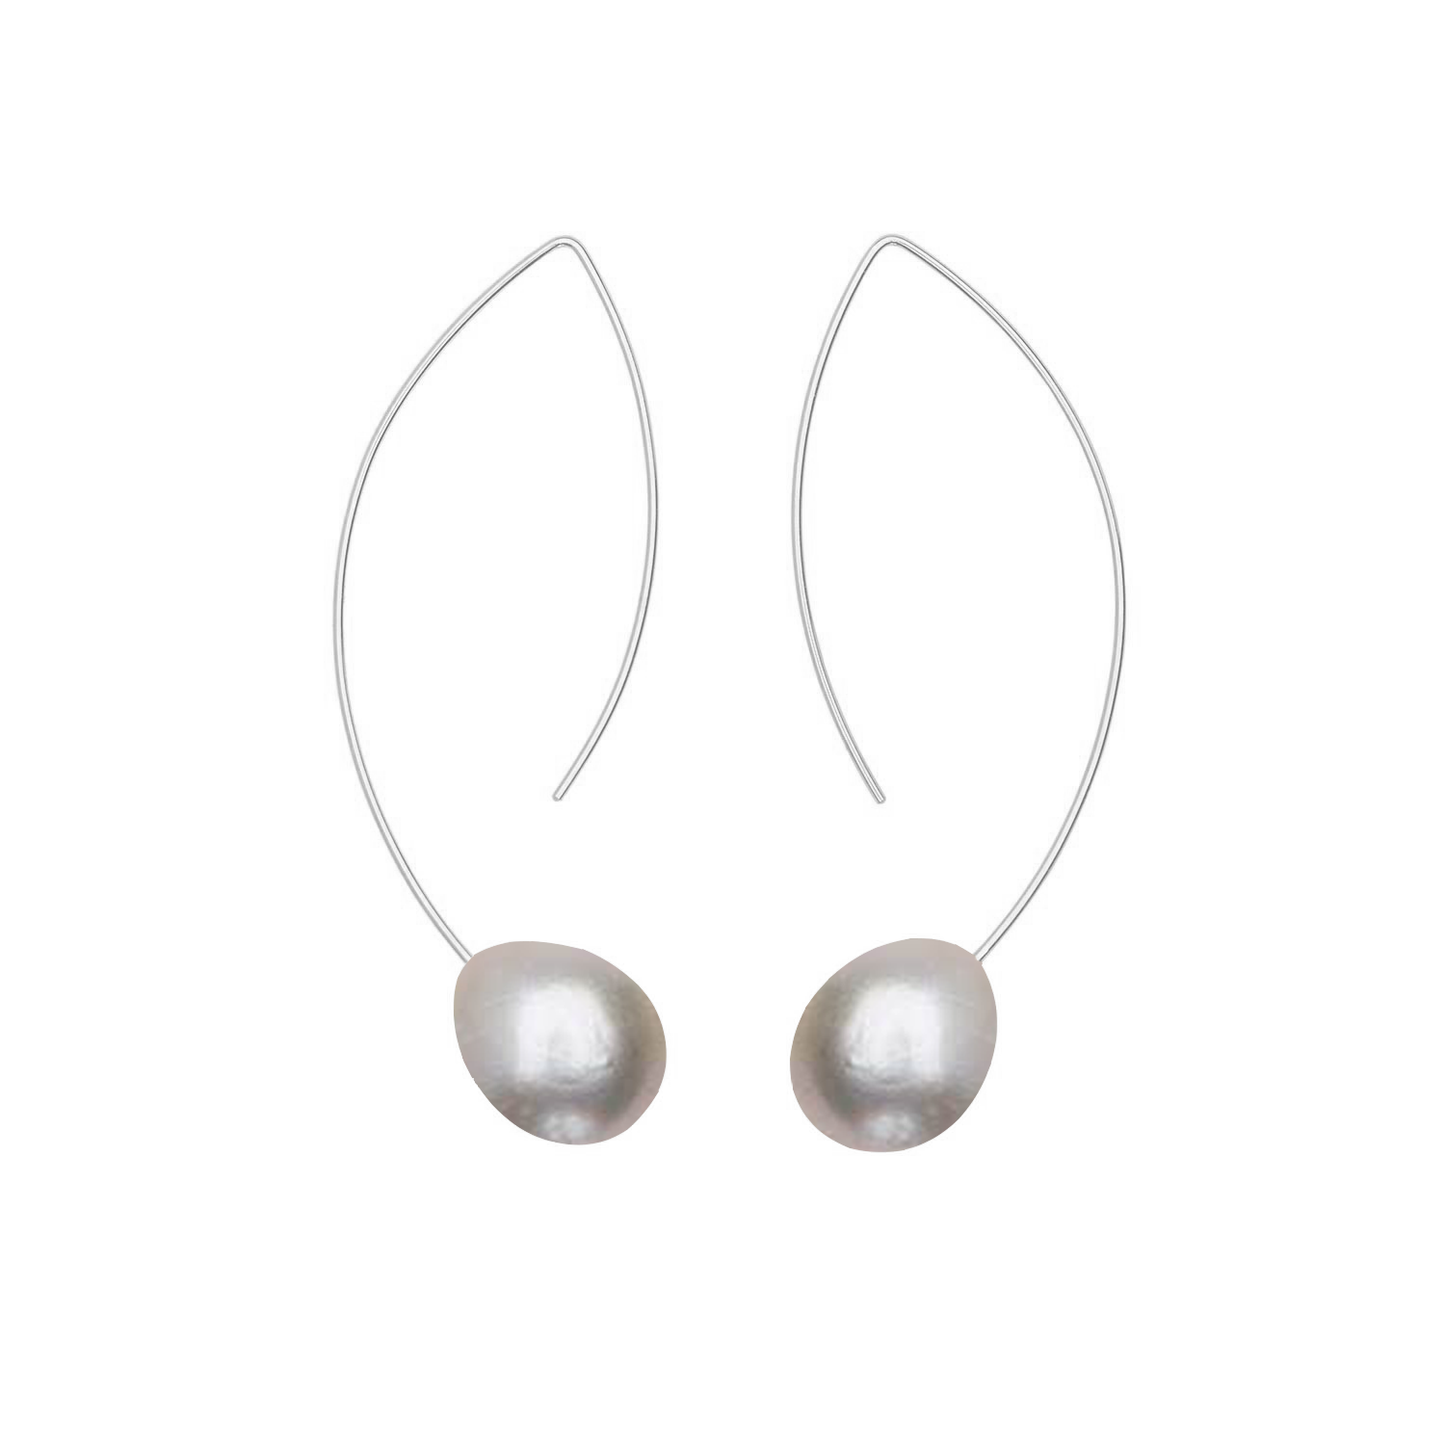 Long Curve Earrings with Drop Round Freshwater Pearls